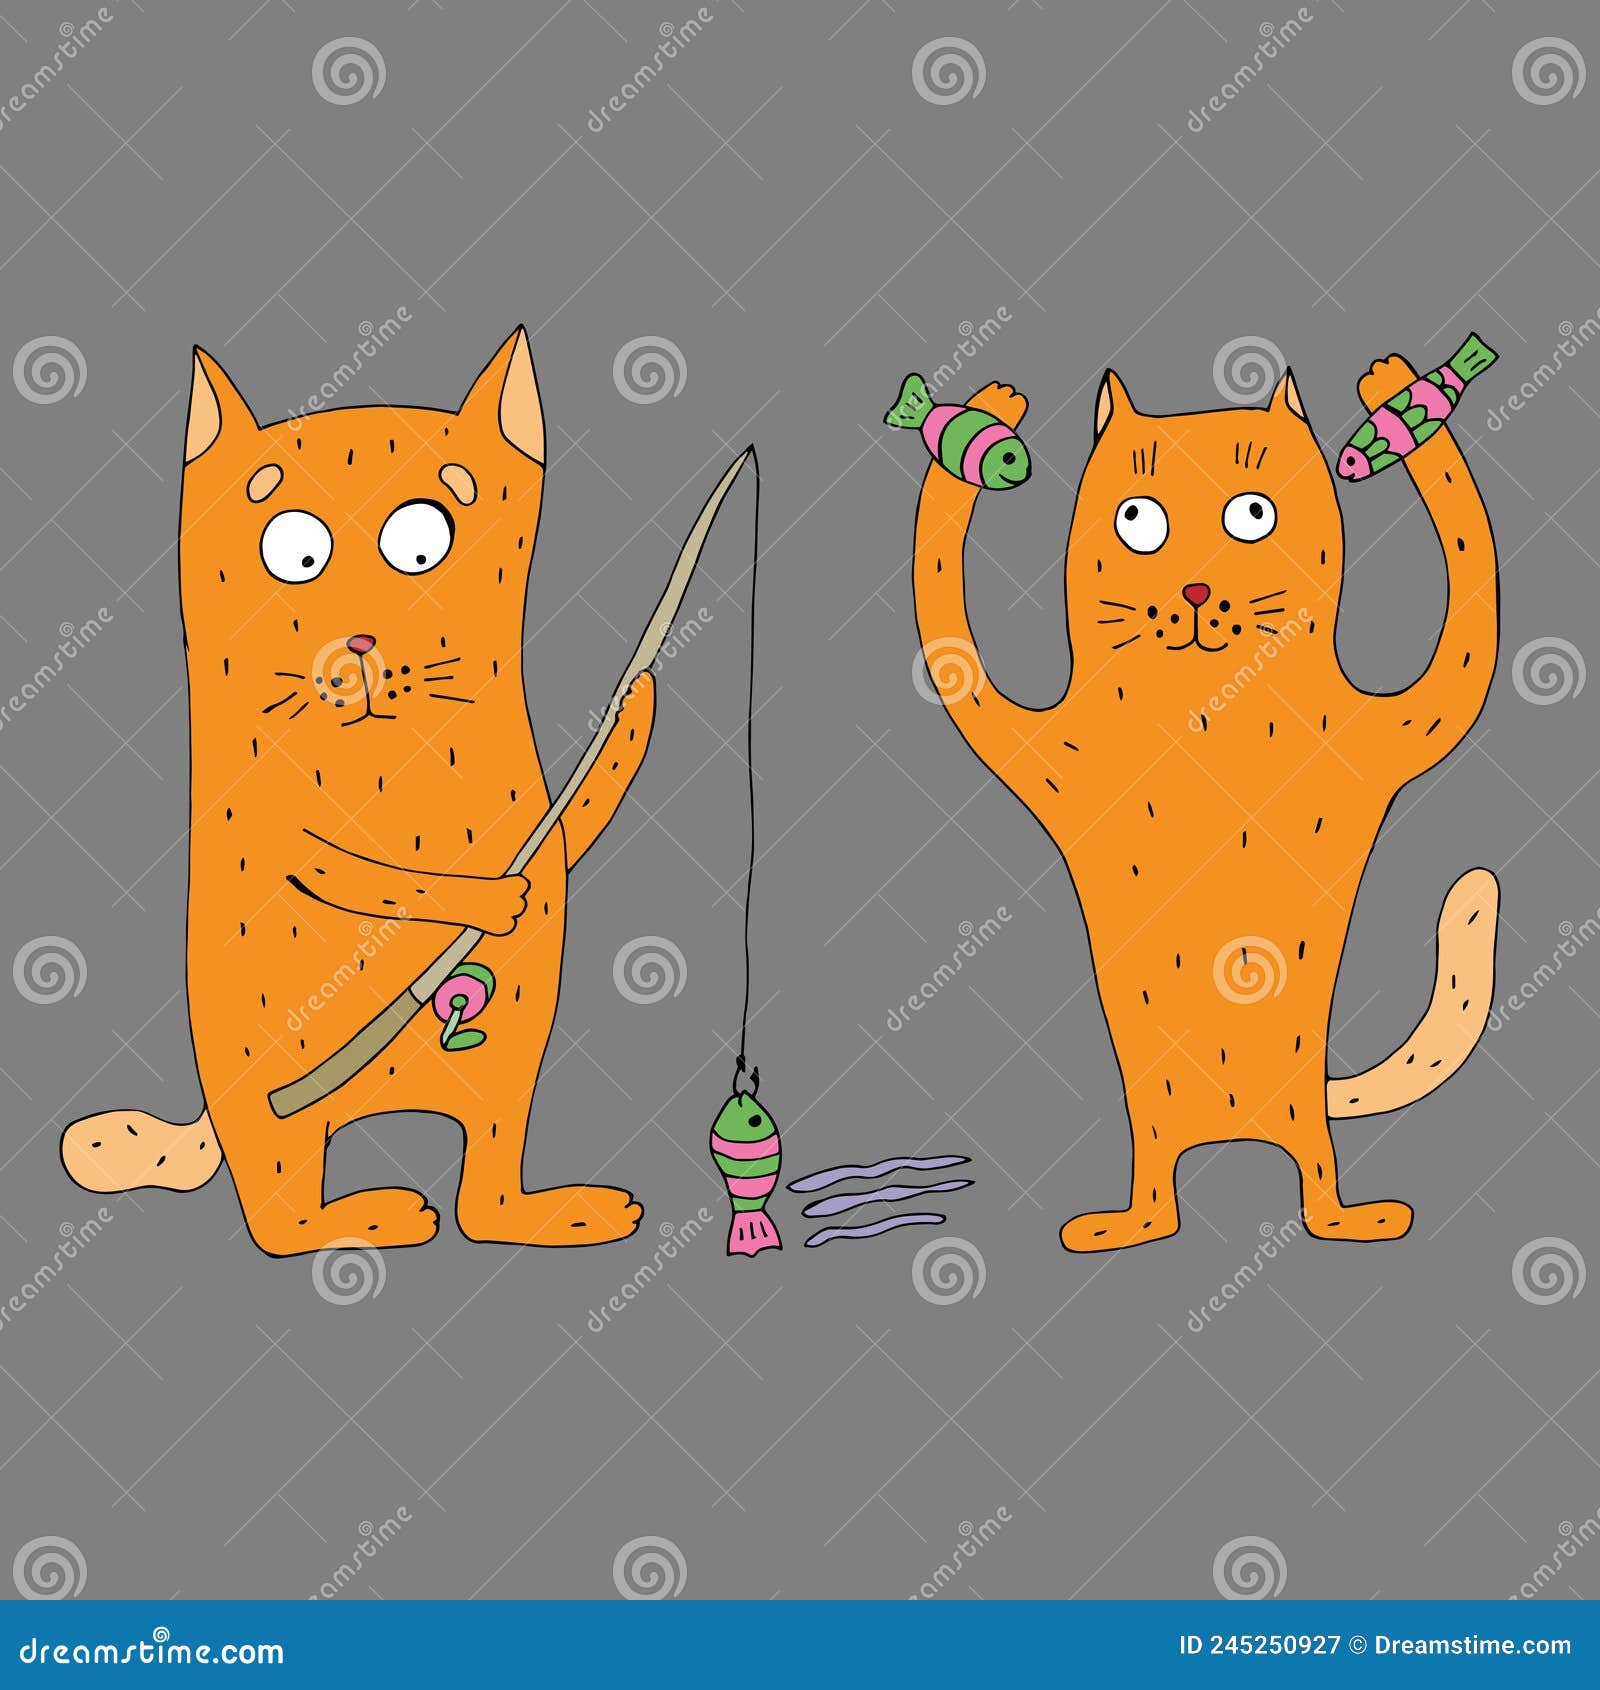 Red Cats Fishing. Funny Cat with a Fishing Rod in His Hands Catches Fish.  Vector Illustration. Comics Stock Vector - Illustration of child, baby:  245250927